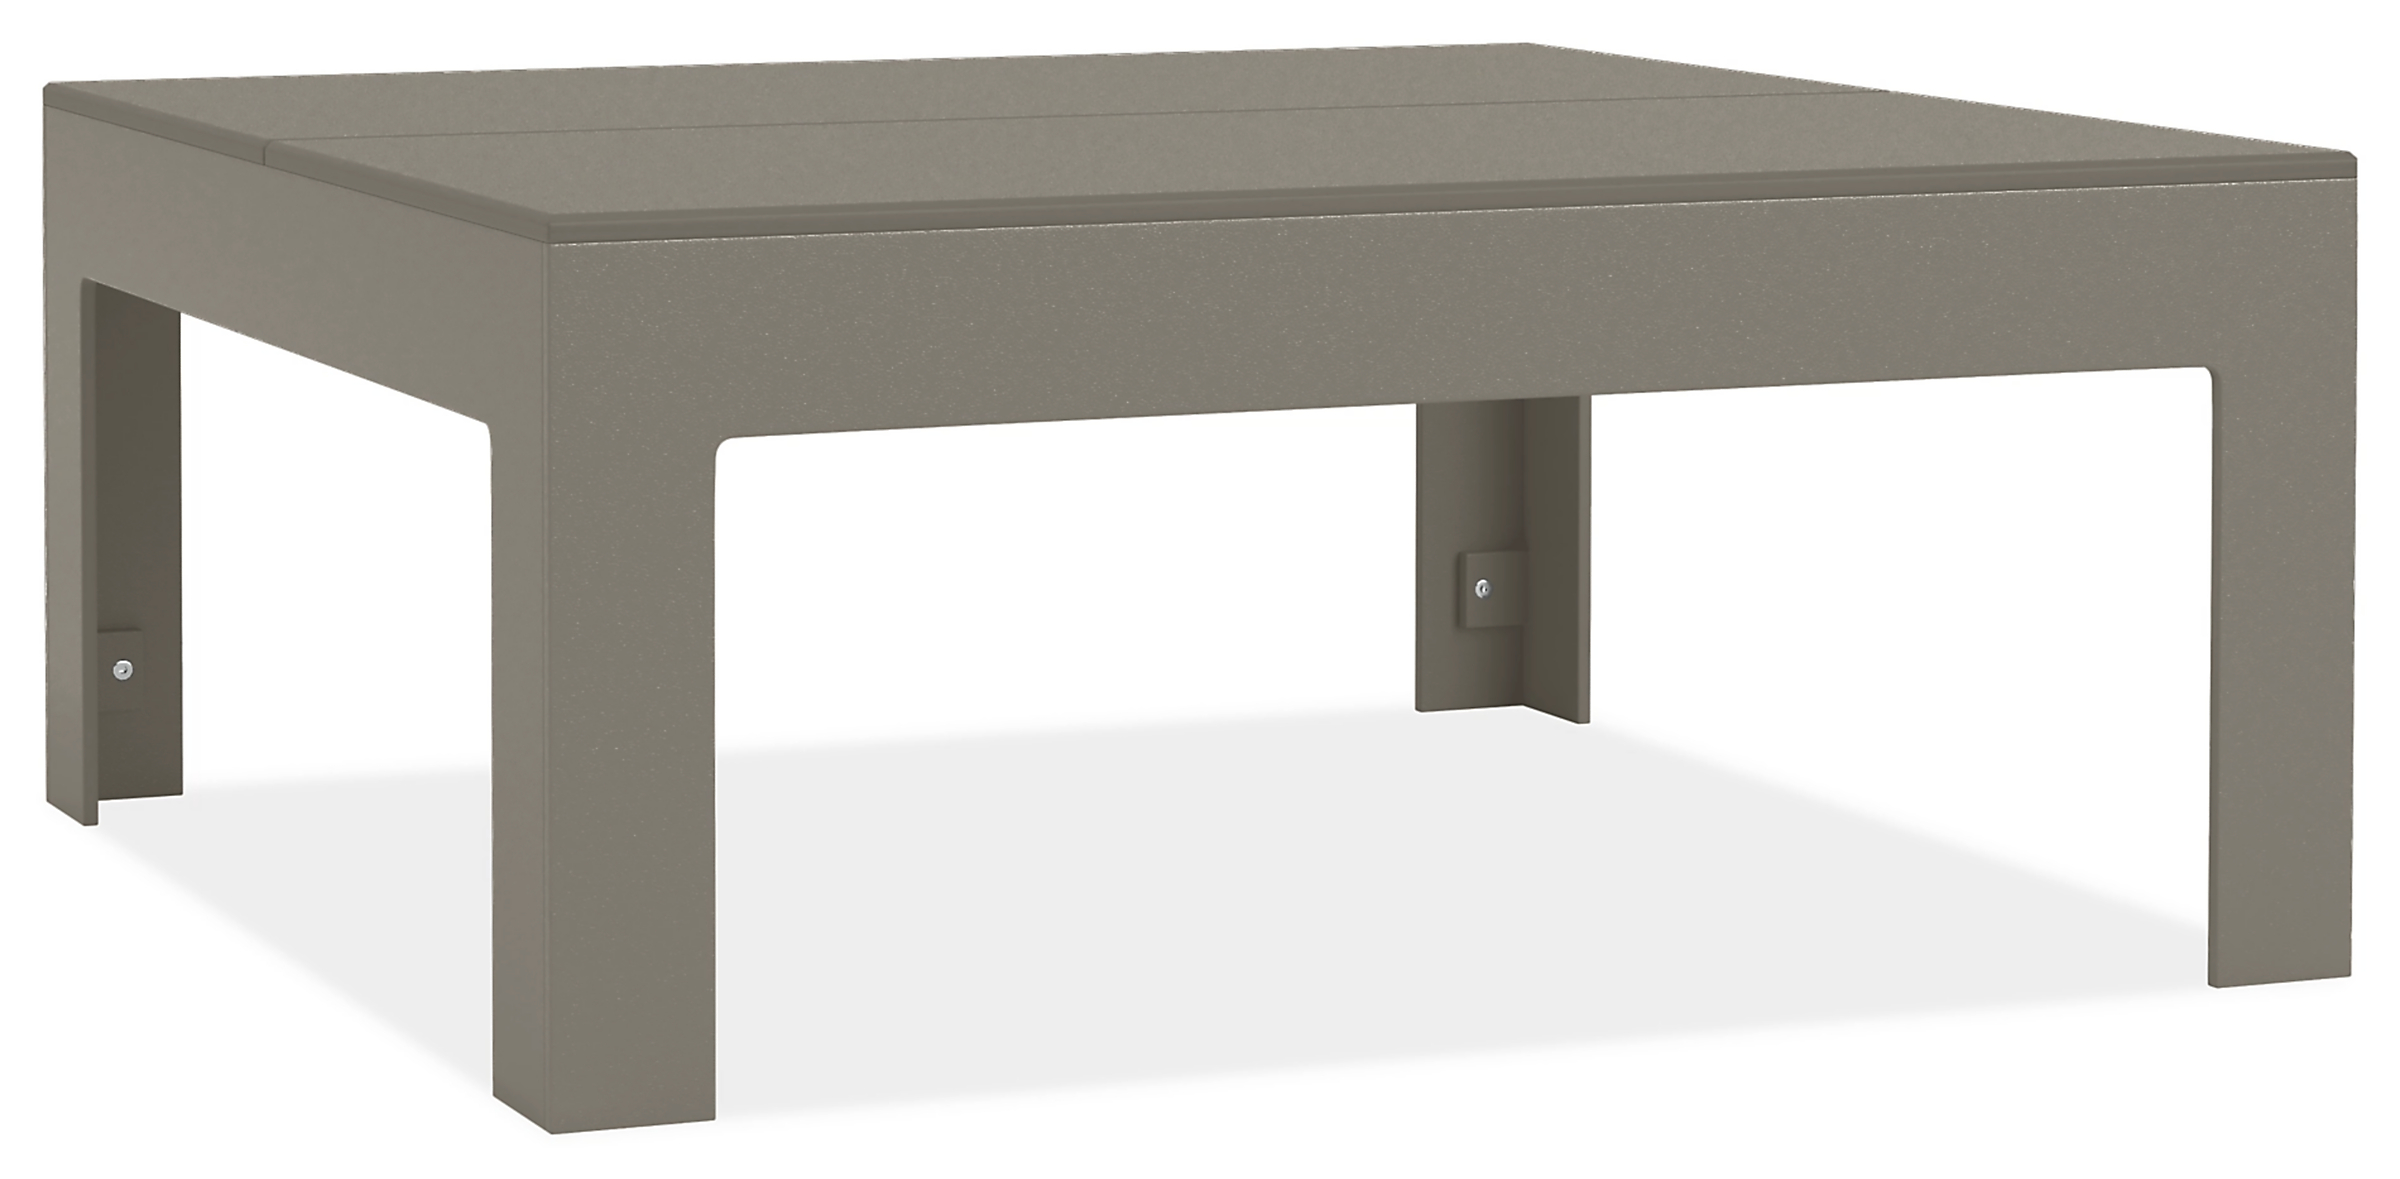 Henry 36w 36d 16h Coffee Table in Putty